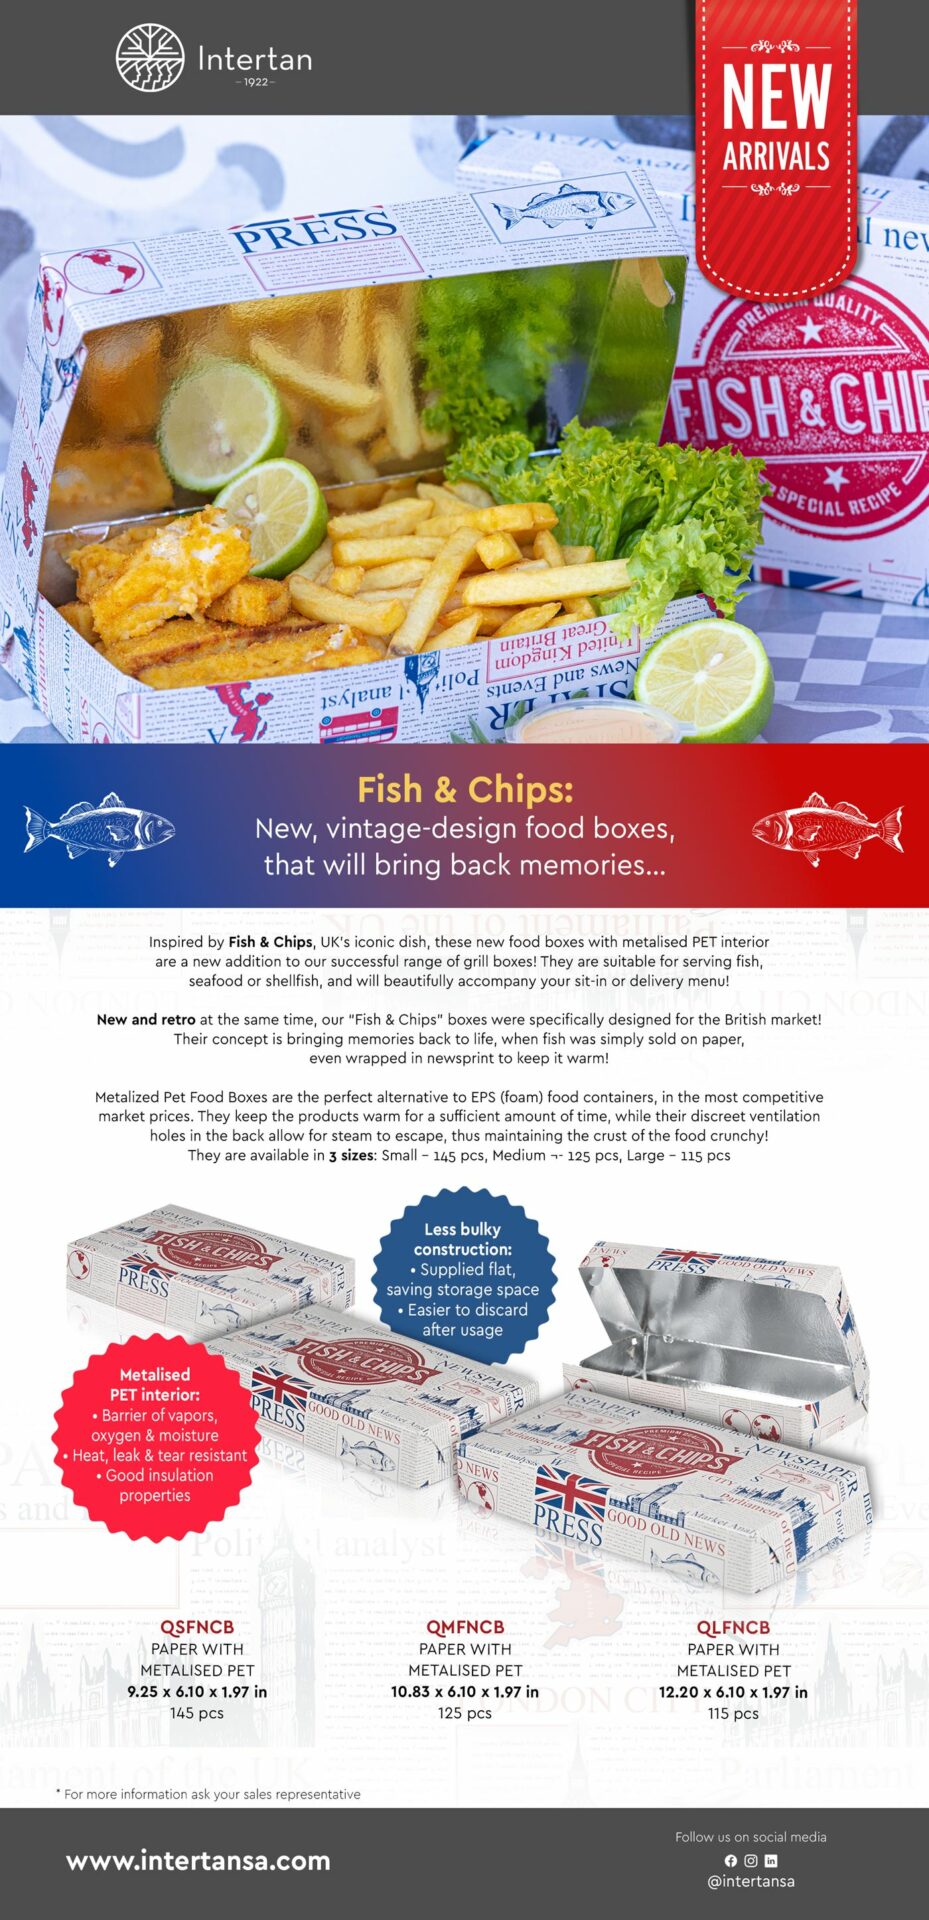 Fish & Chips Boxes Newsletter | Intertan S.A.